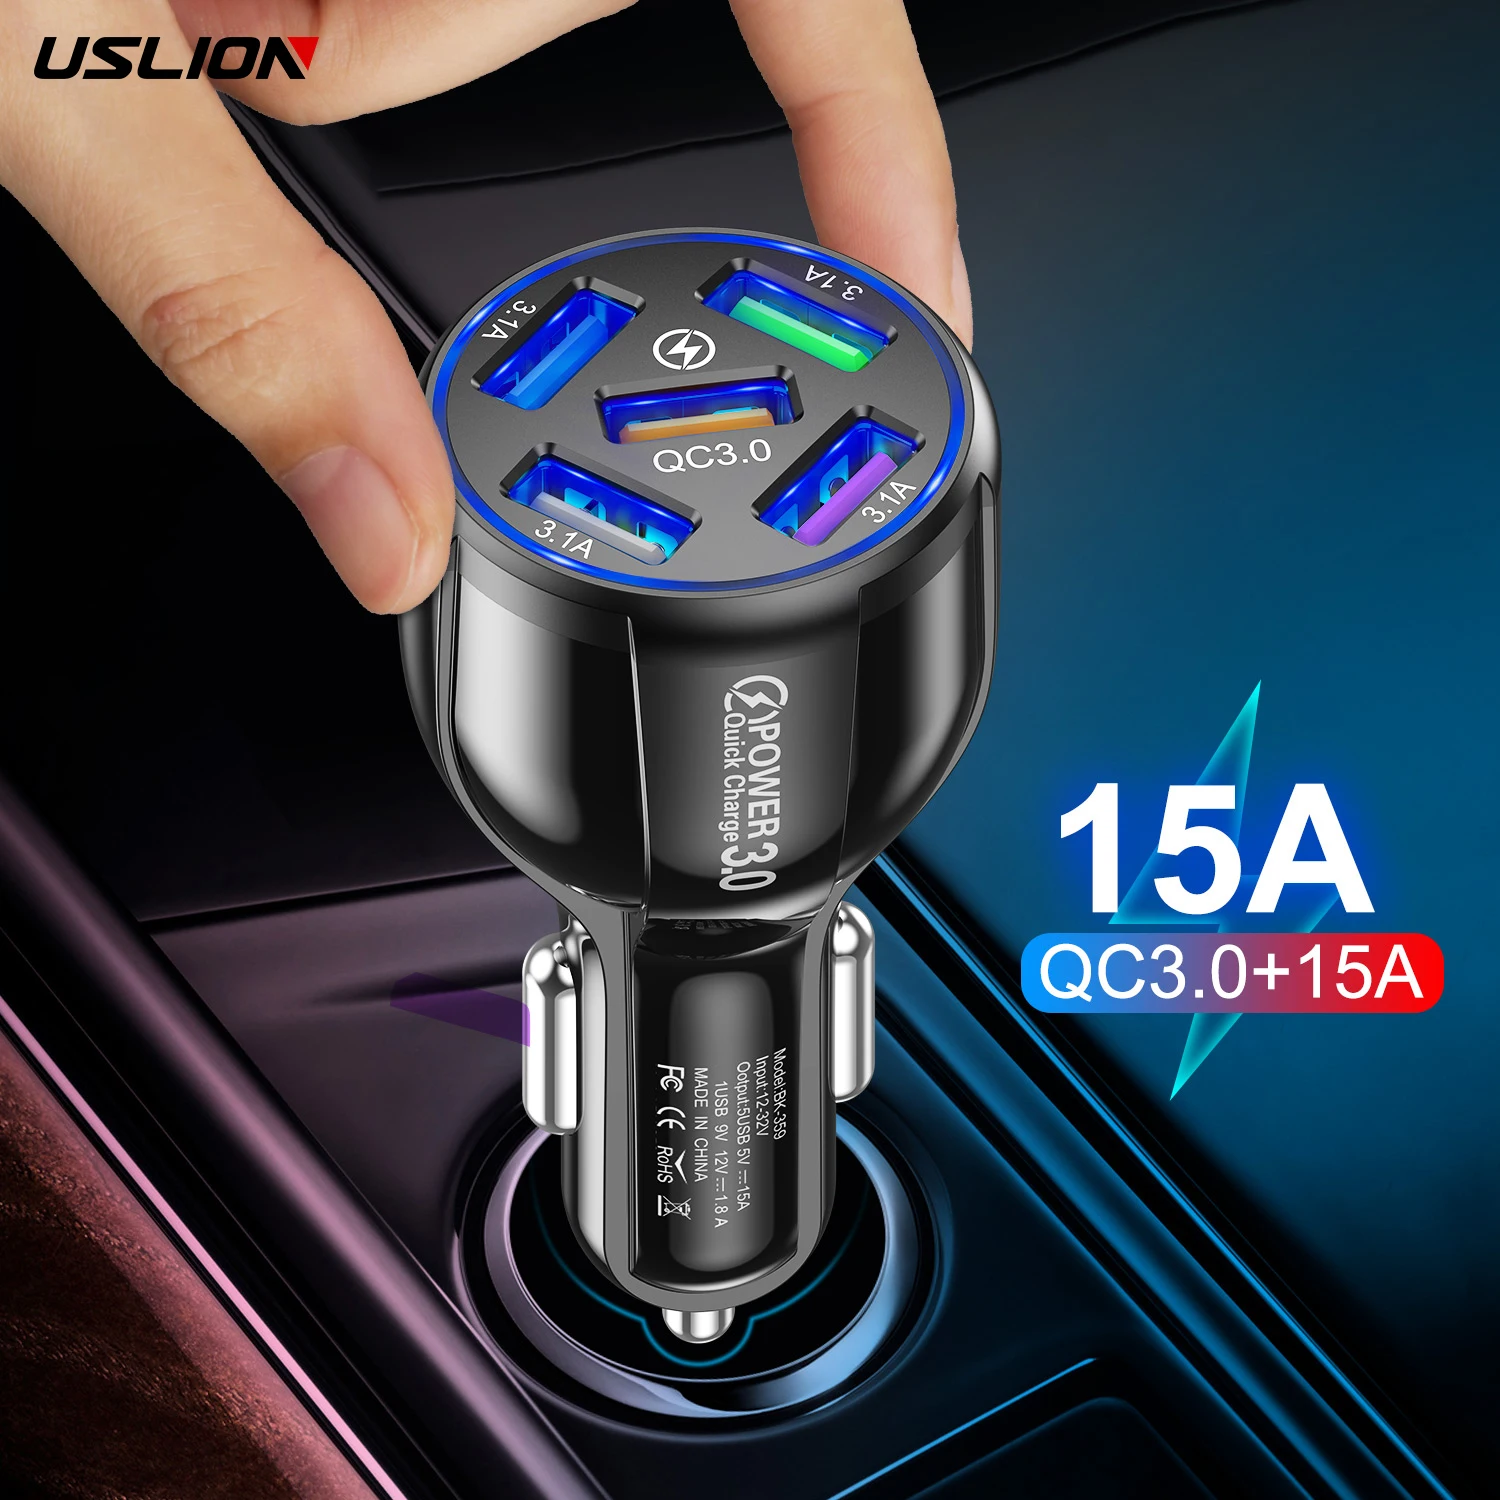 

USLION QC3.0 15A Car Charger 5 USB Ports Car Phone Charger Mobile Phone Electric Car Adapter With Blue Lighting, Black,white